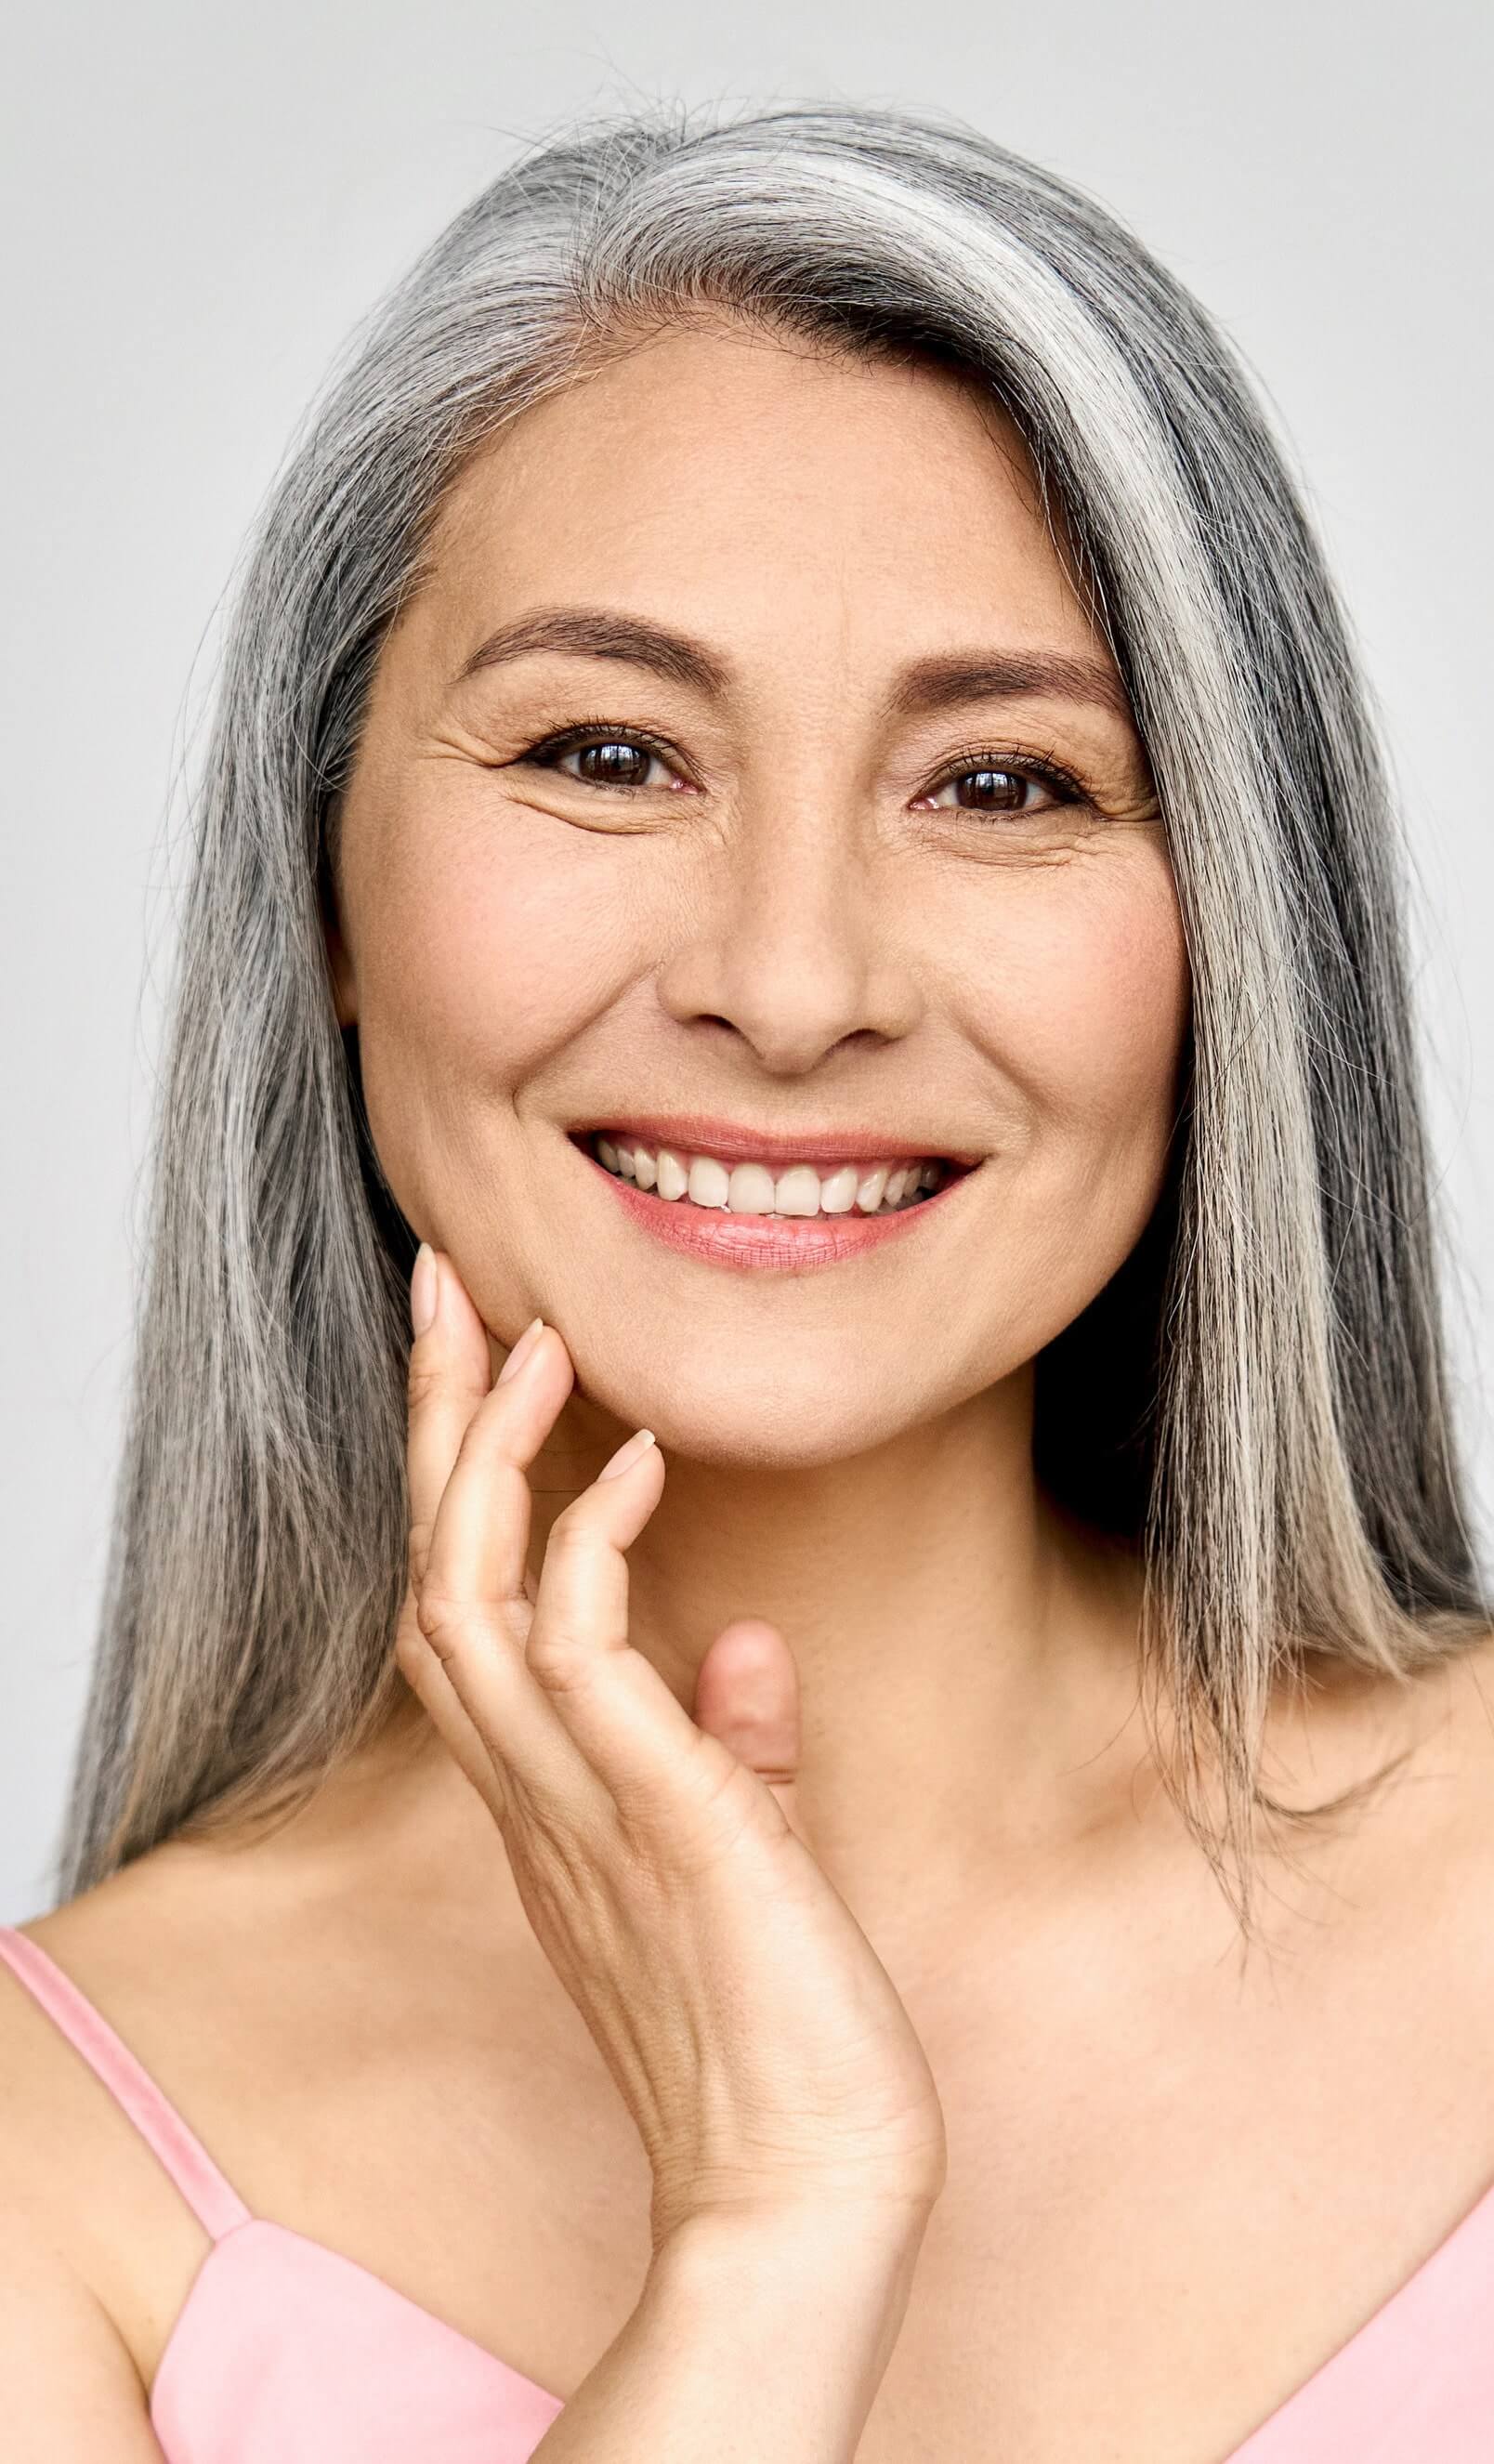 Photo of an older woman with graying hair and great skin